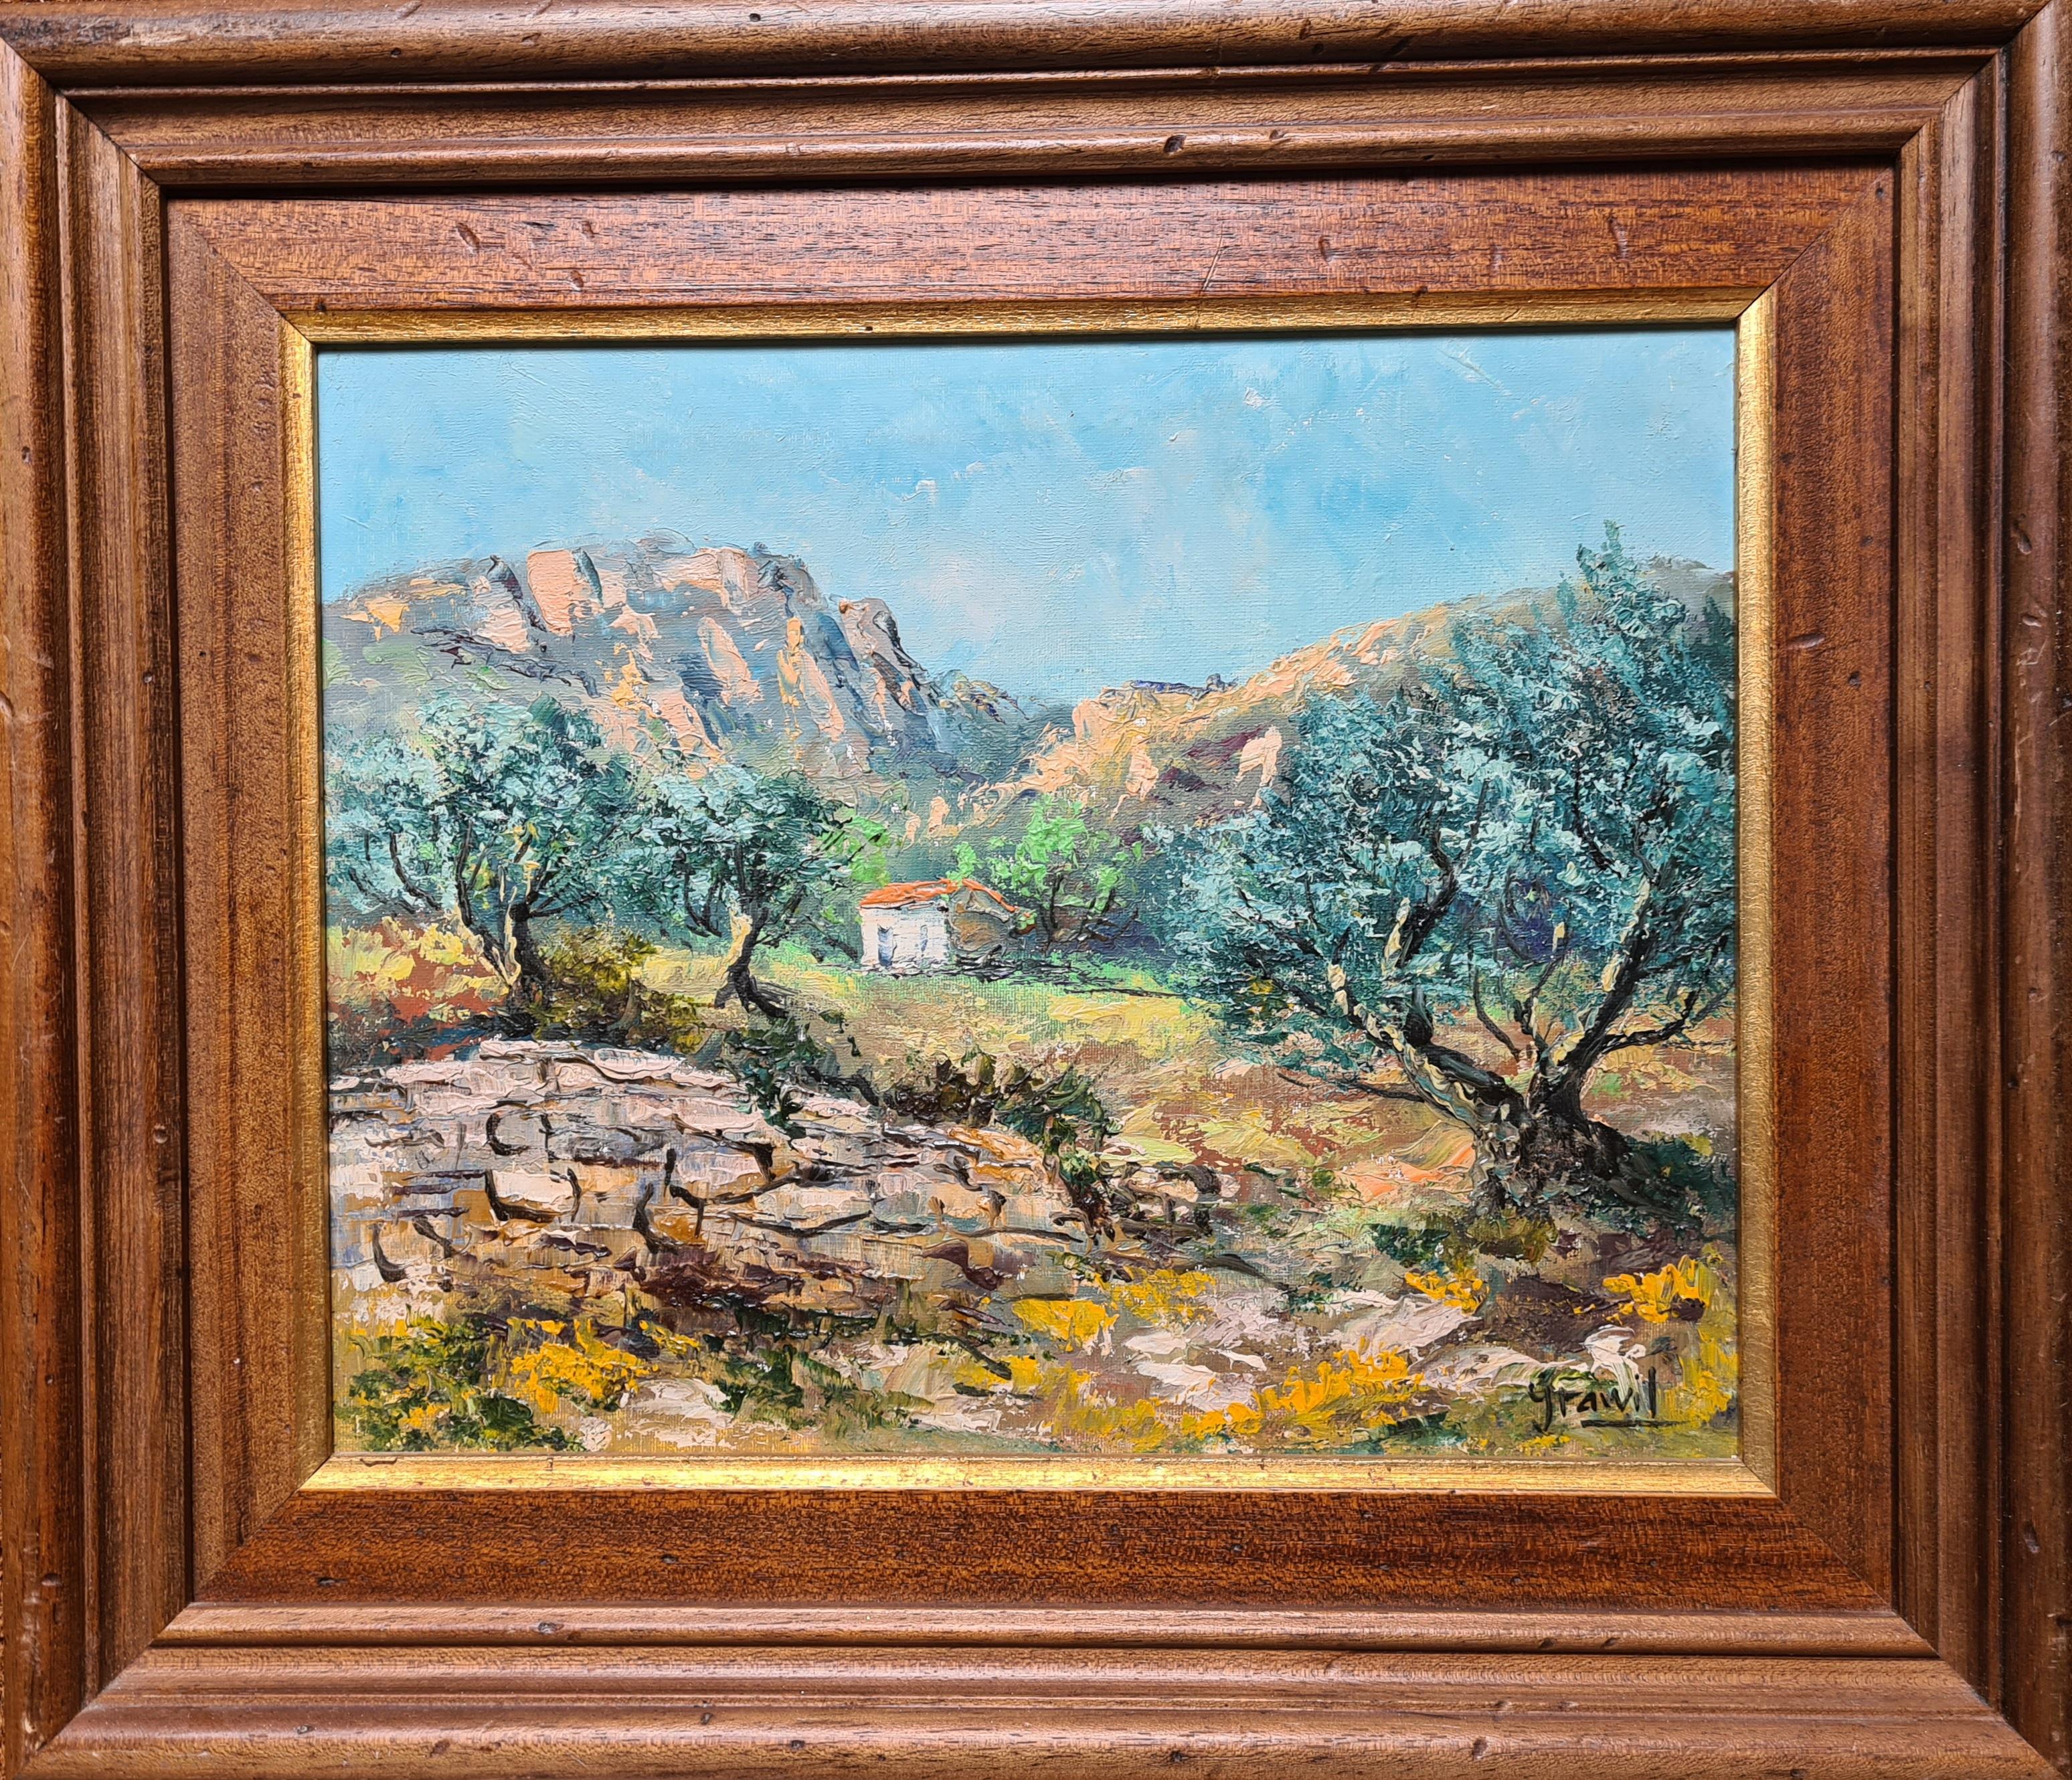 Le Cabanon Provençal et son Oliveraie, French Country Cottage in an Olive Grove - Painting by Maurice Schwab aka 'Grawil'